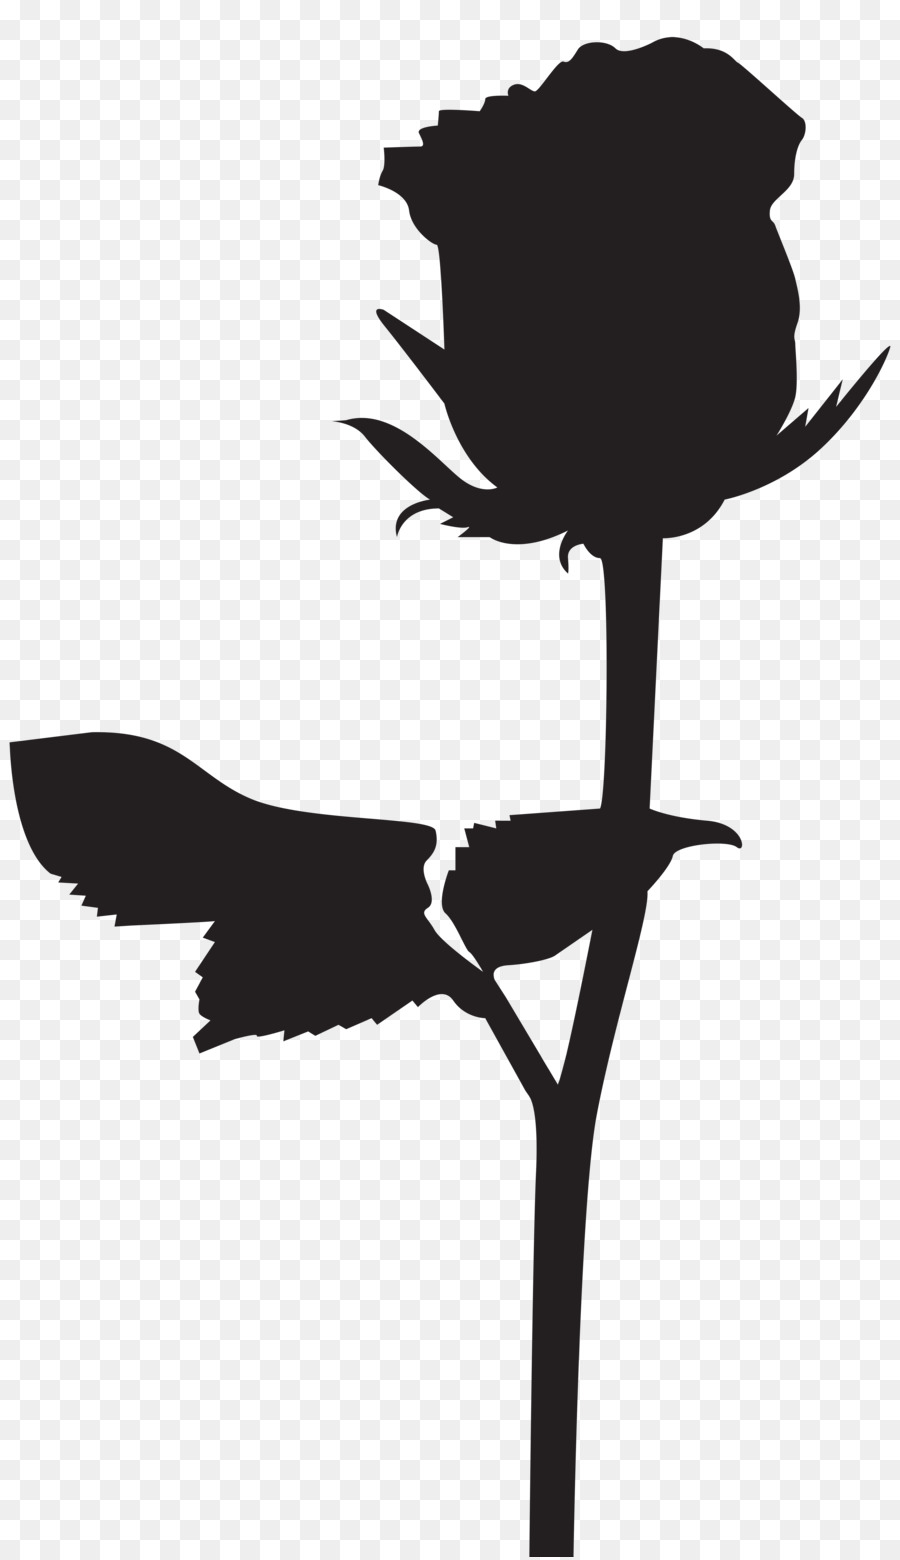 Silhouette Black rose Drawing Clip art - silhouettes png download - 4624*8000 - Free Transparent Silhouette png Download.